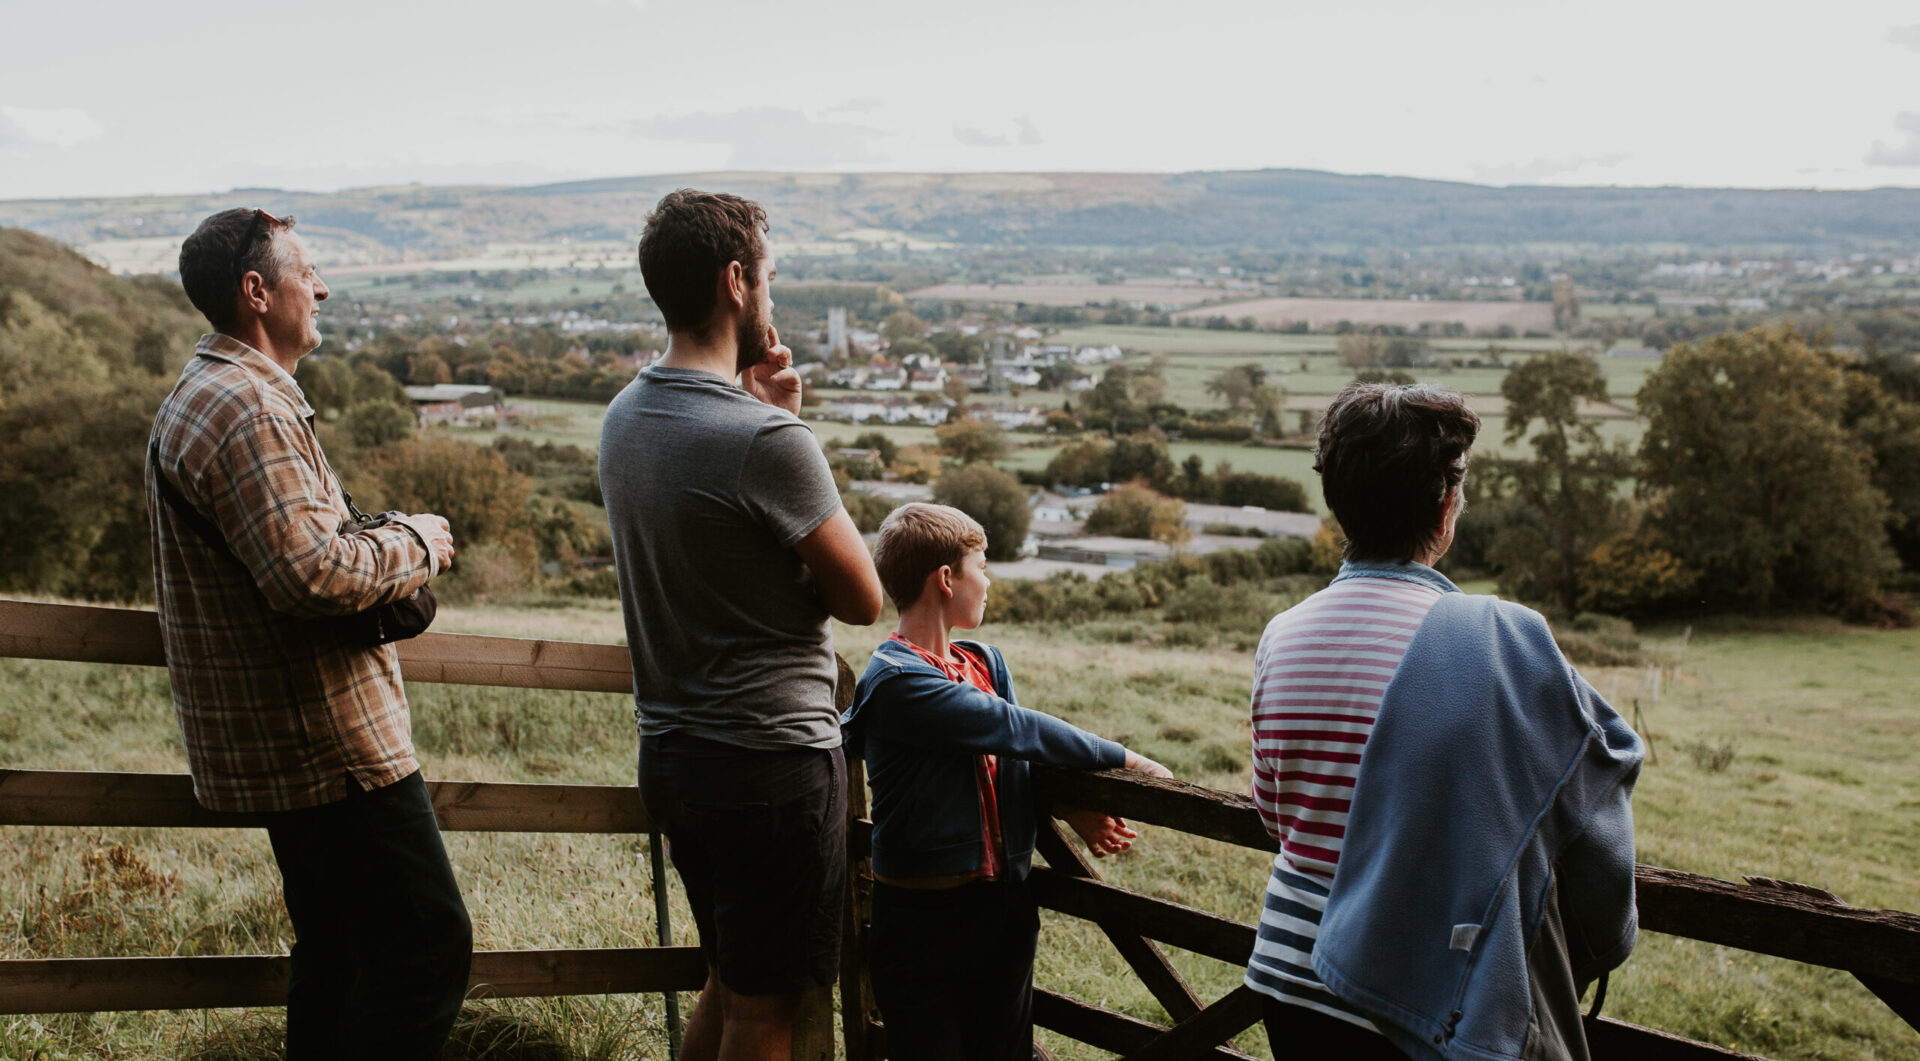 Family photos on a countryside walk leaning against a wooden gate looking out over the Green Belt